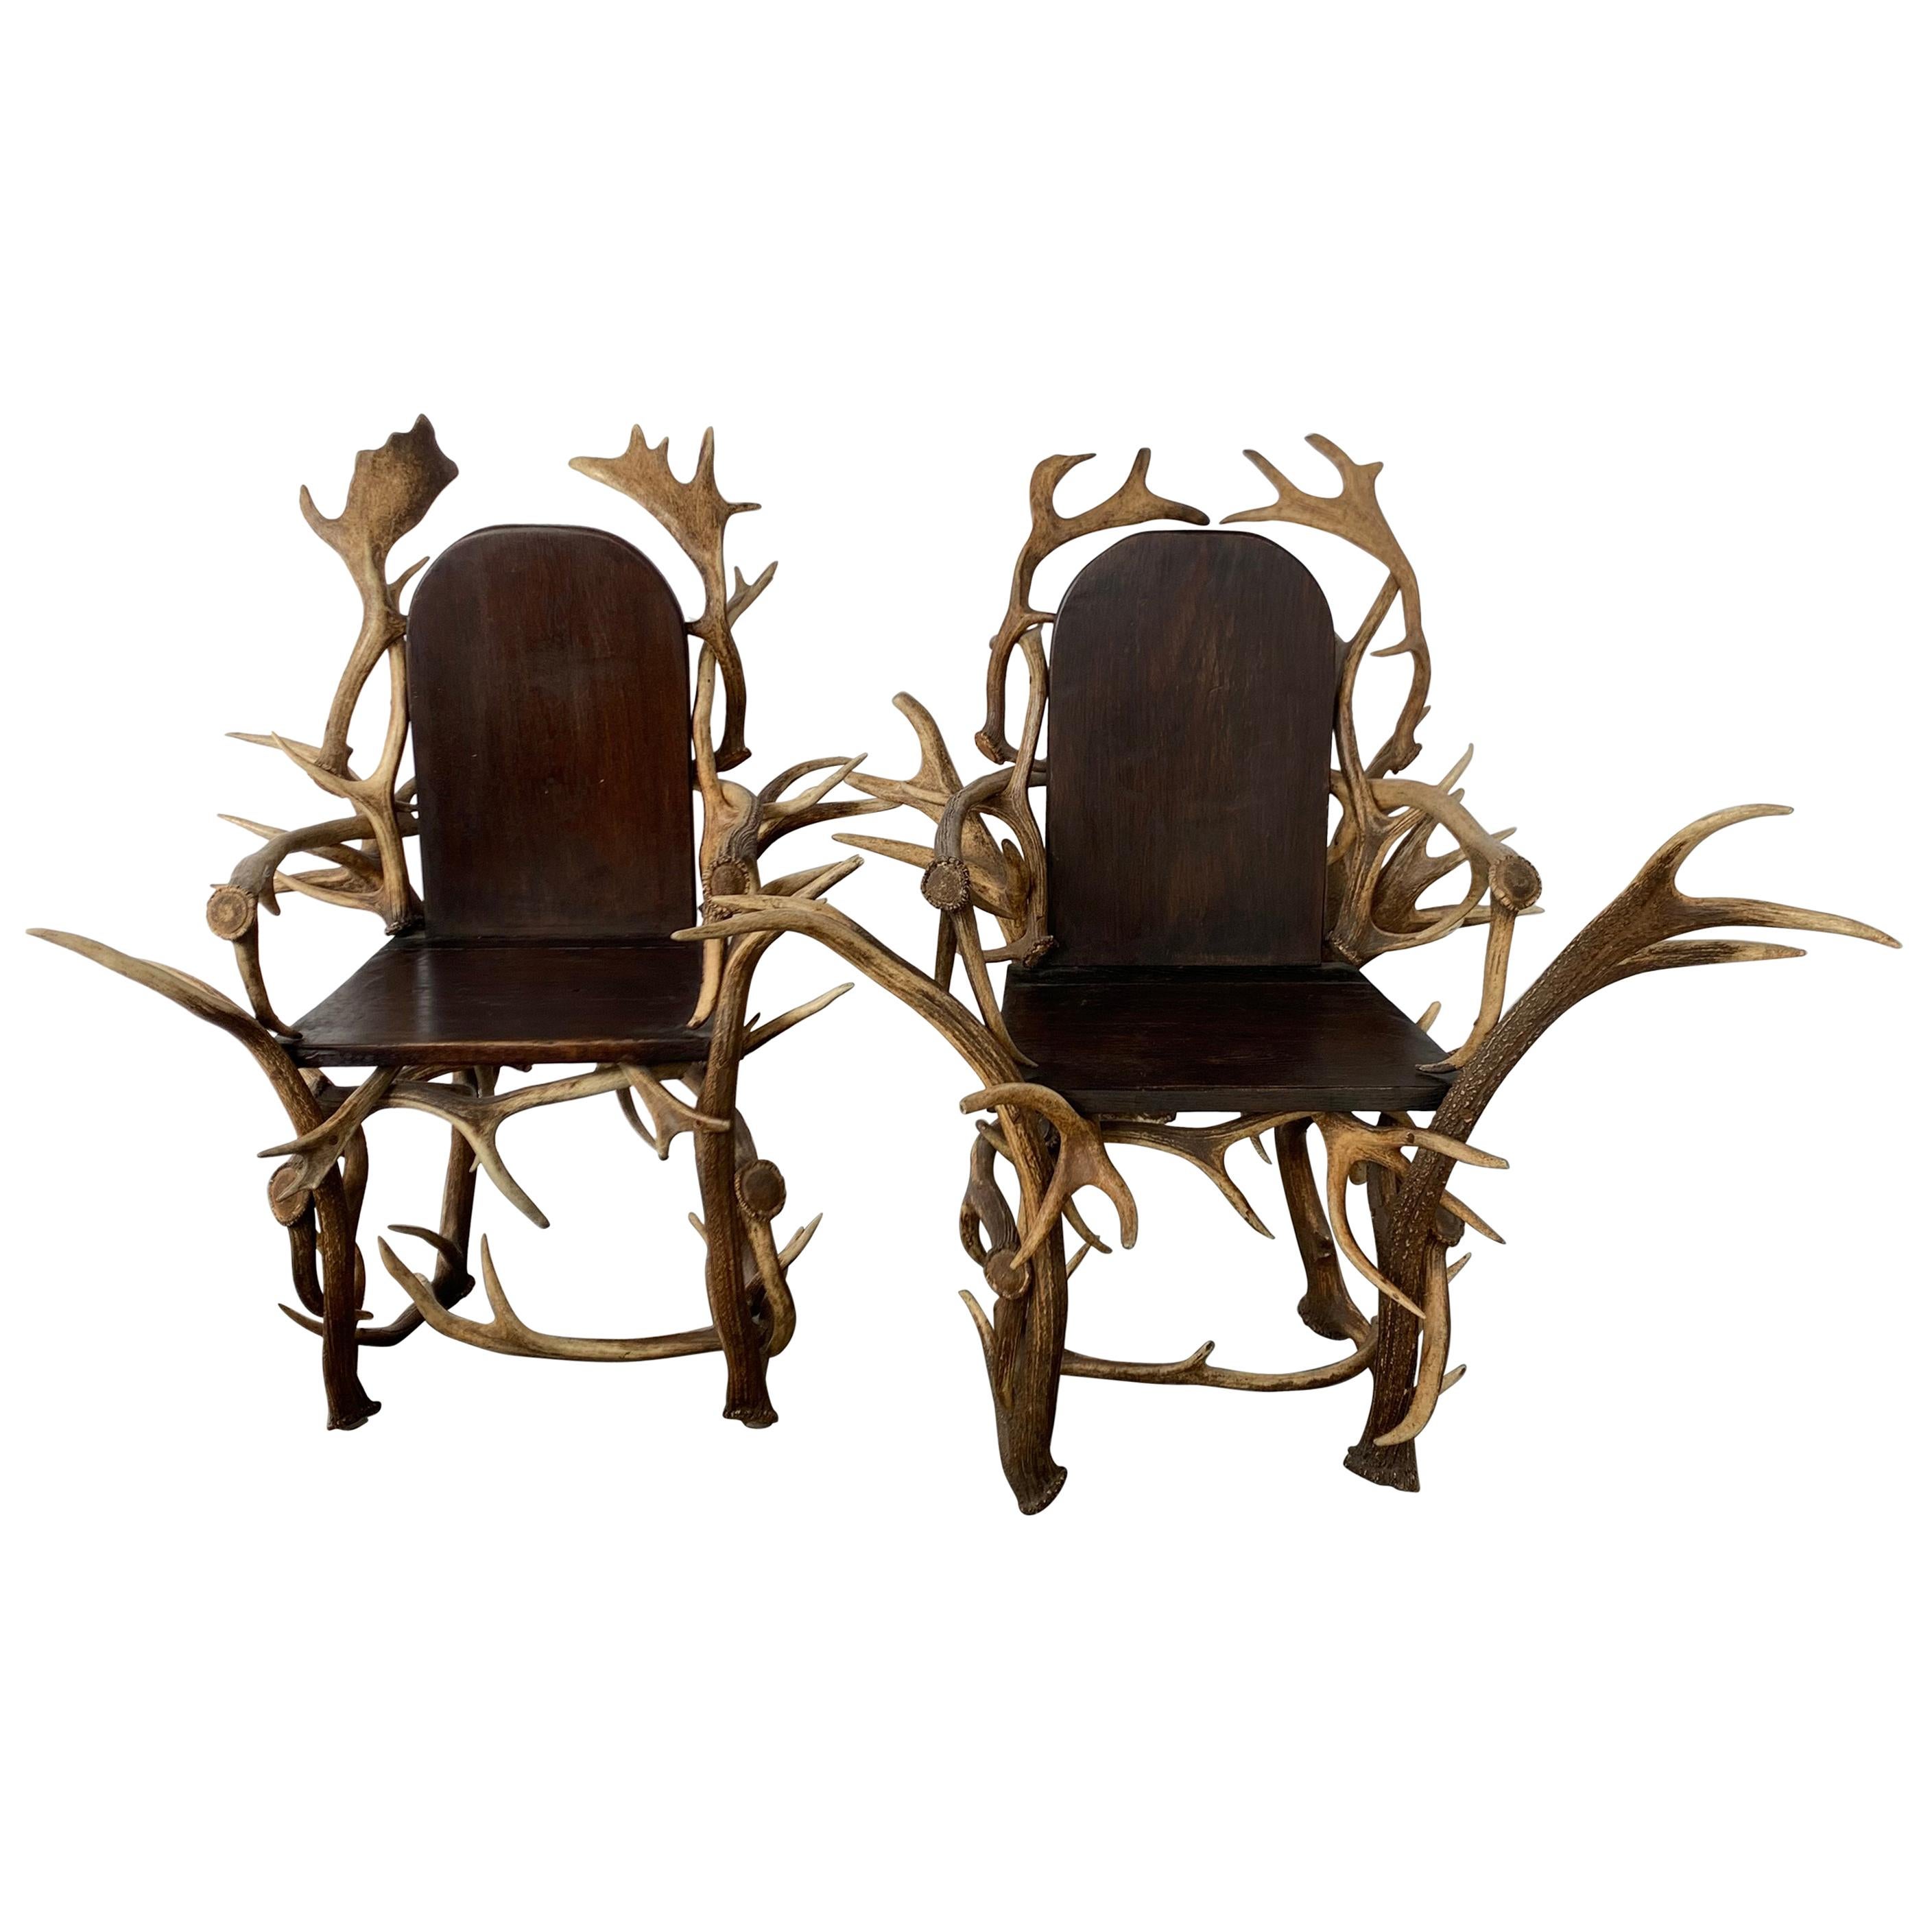 Pair Of Large American Antler Armchairs, 1920s